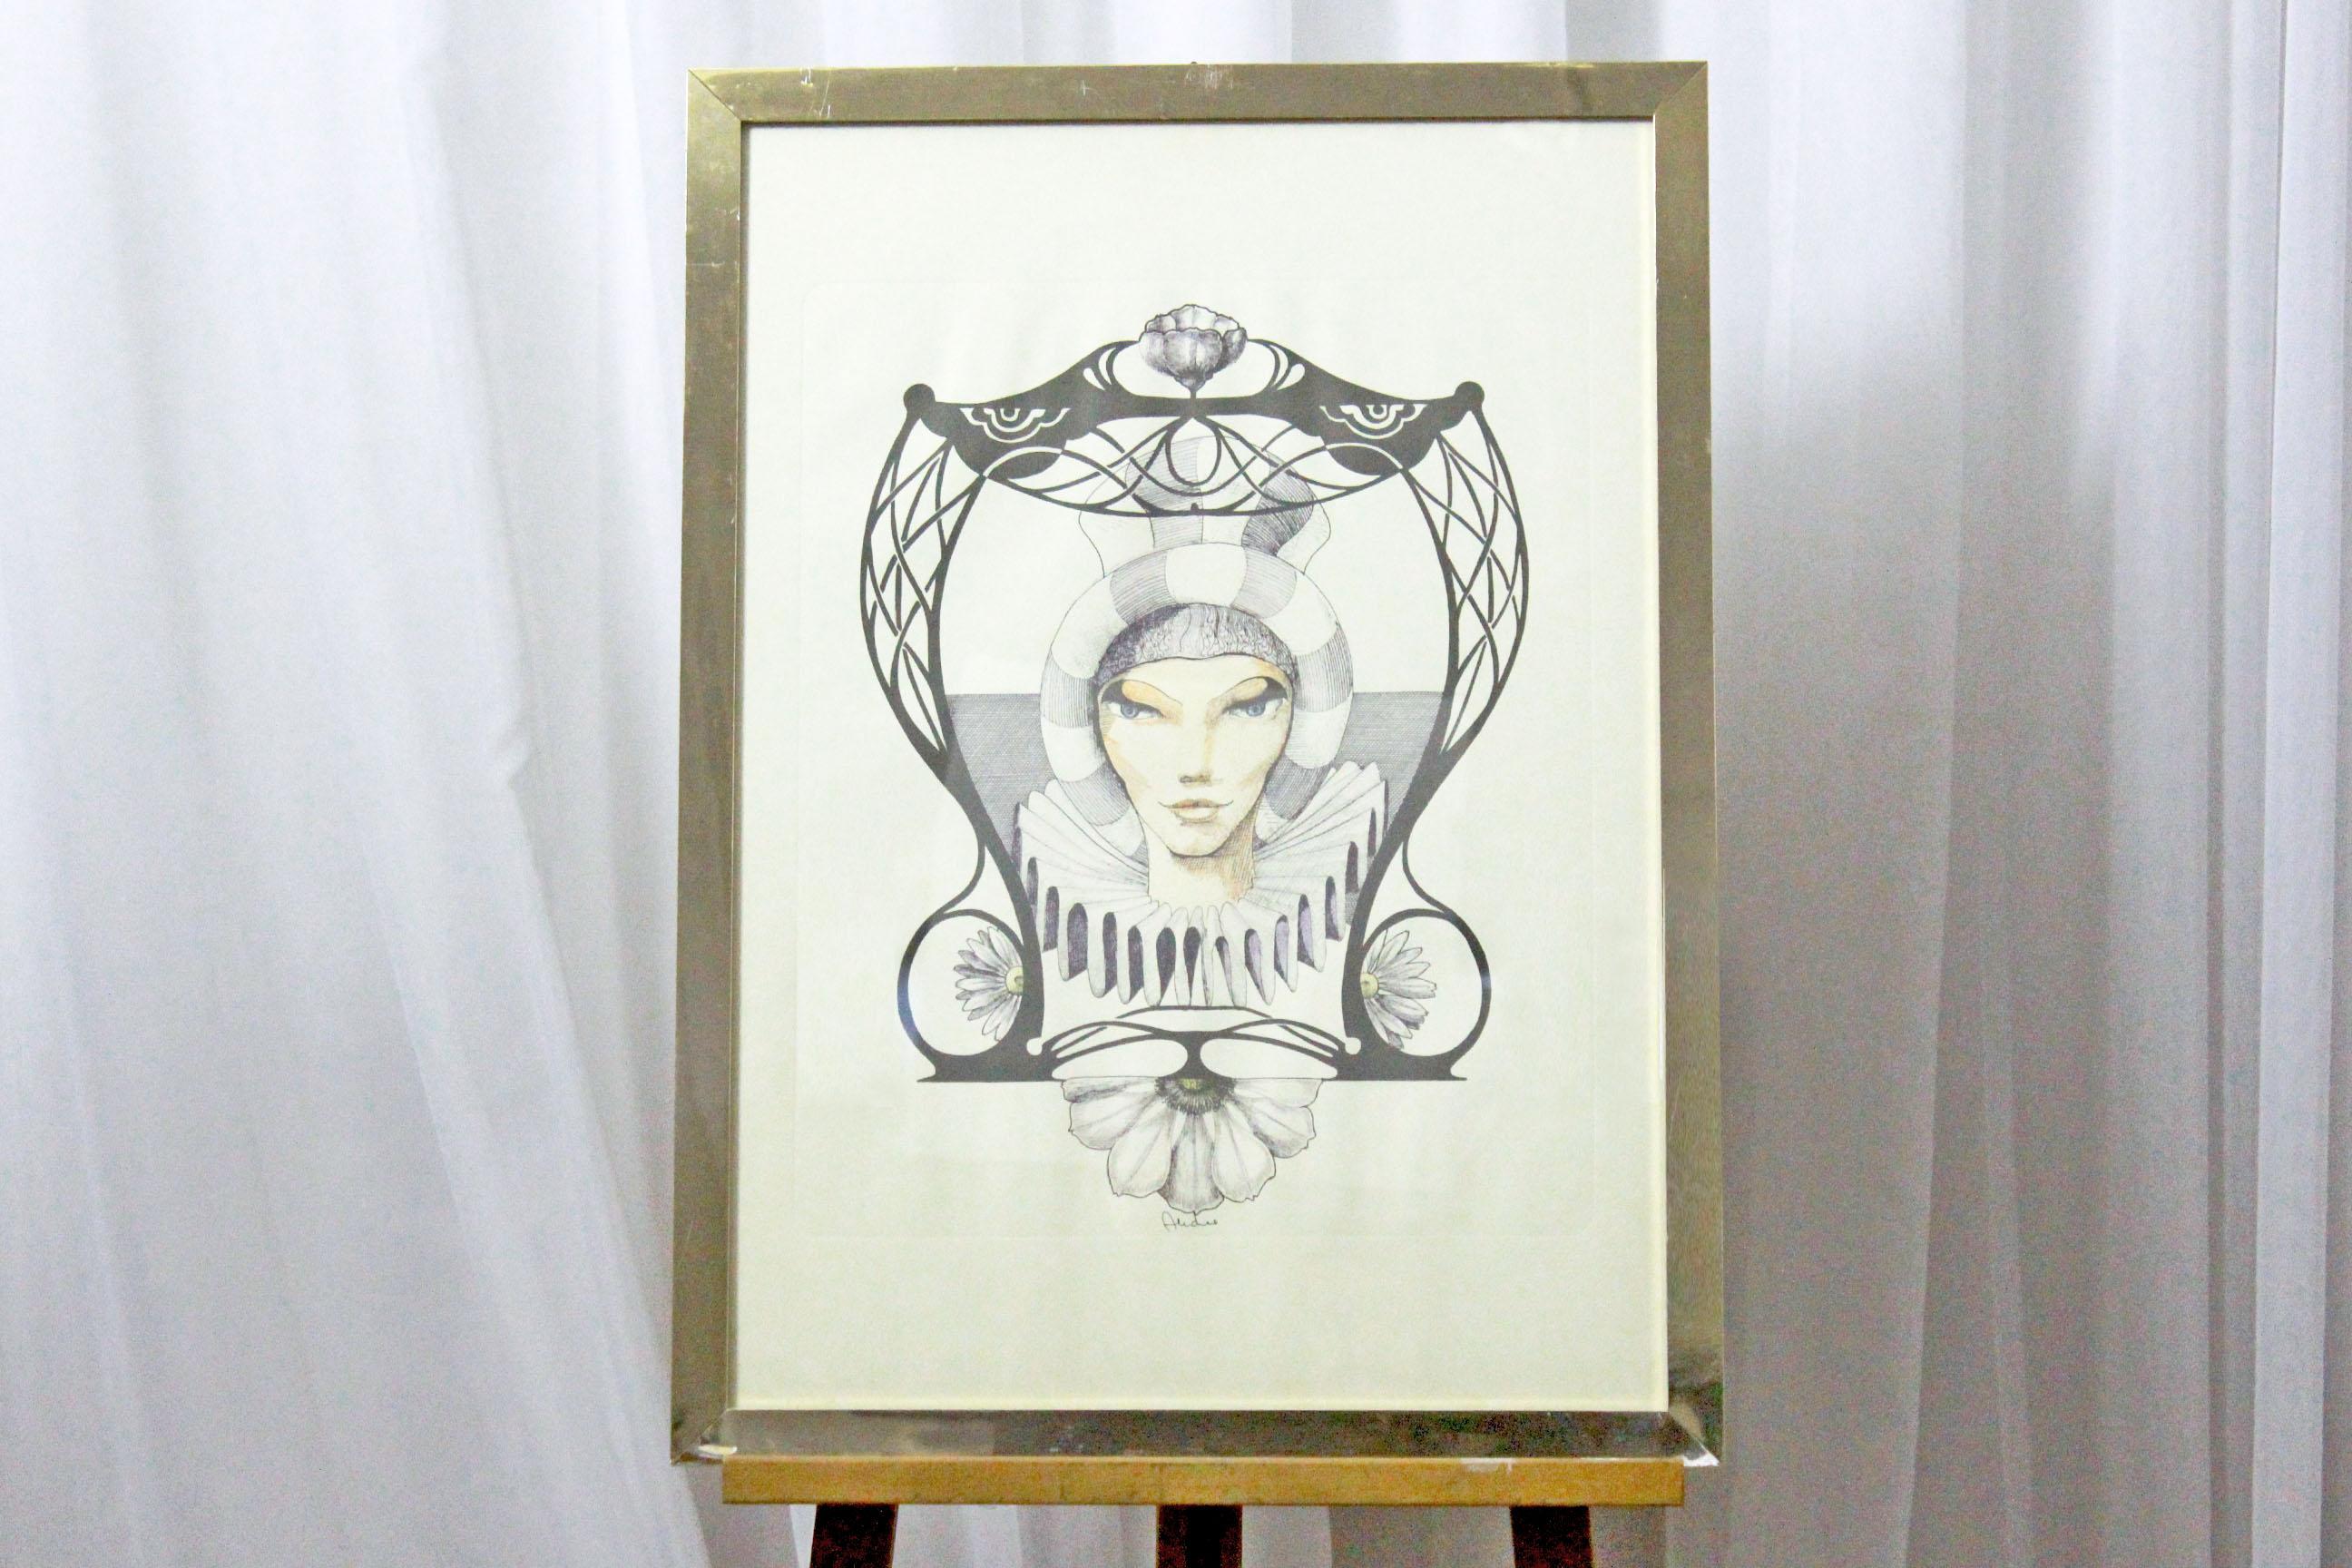 Vintage hand drawings by Andrea Burroni, 1970s. The piece has signed by the author and it has a “Certificate of Authenticity” on the back. This piece is not pre-owned, but has been used for display purposes and might show minor signs of wear. The